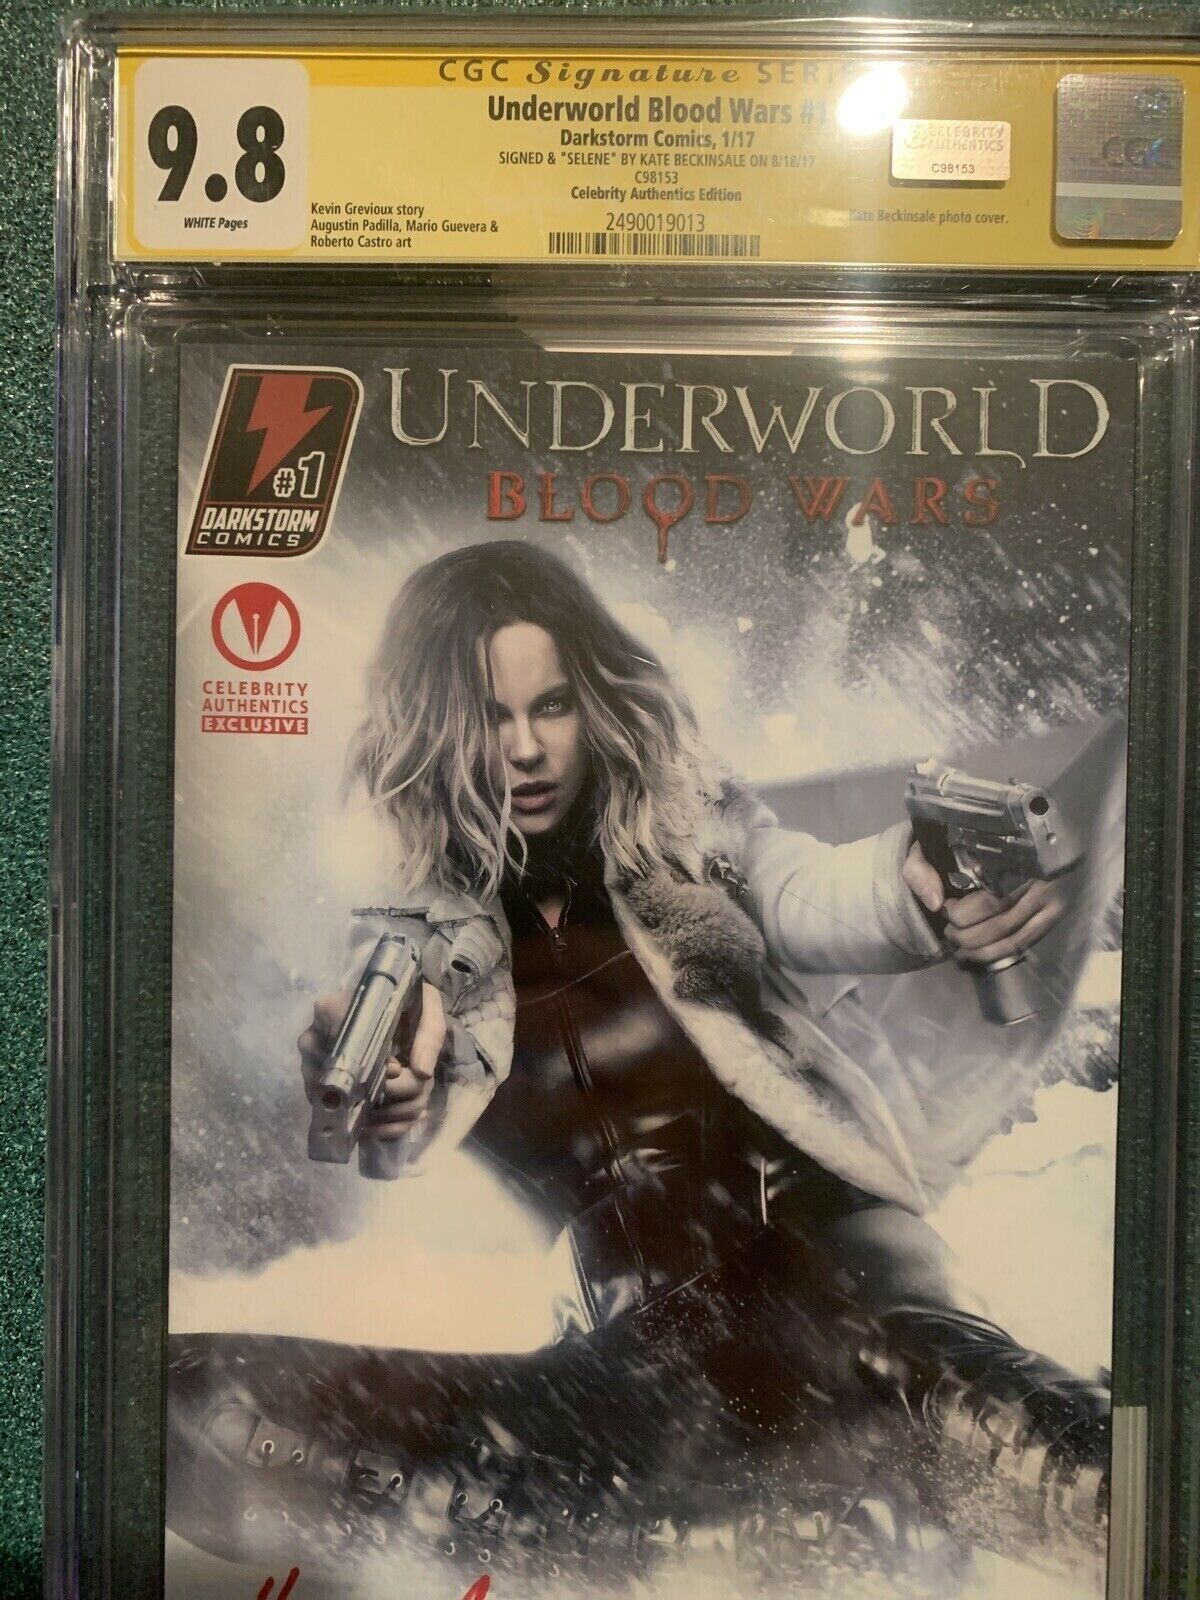 Kate Beckinsale Autographed Signed CGC 9.8 Underworld: Blood Wars #1 Photo Cover